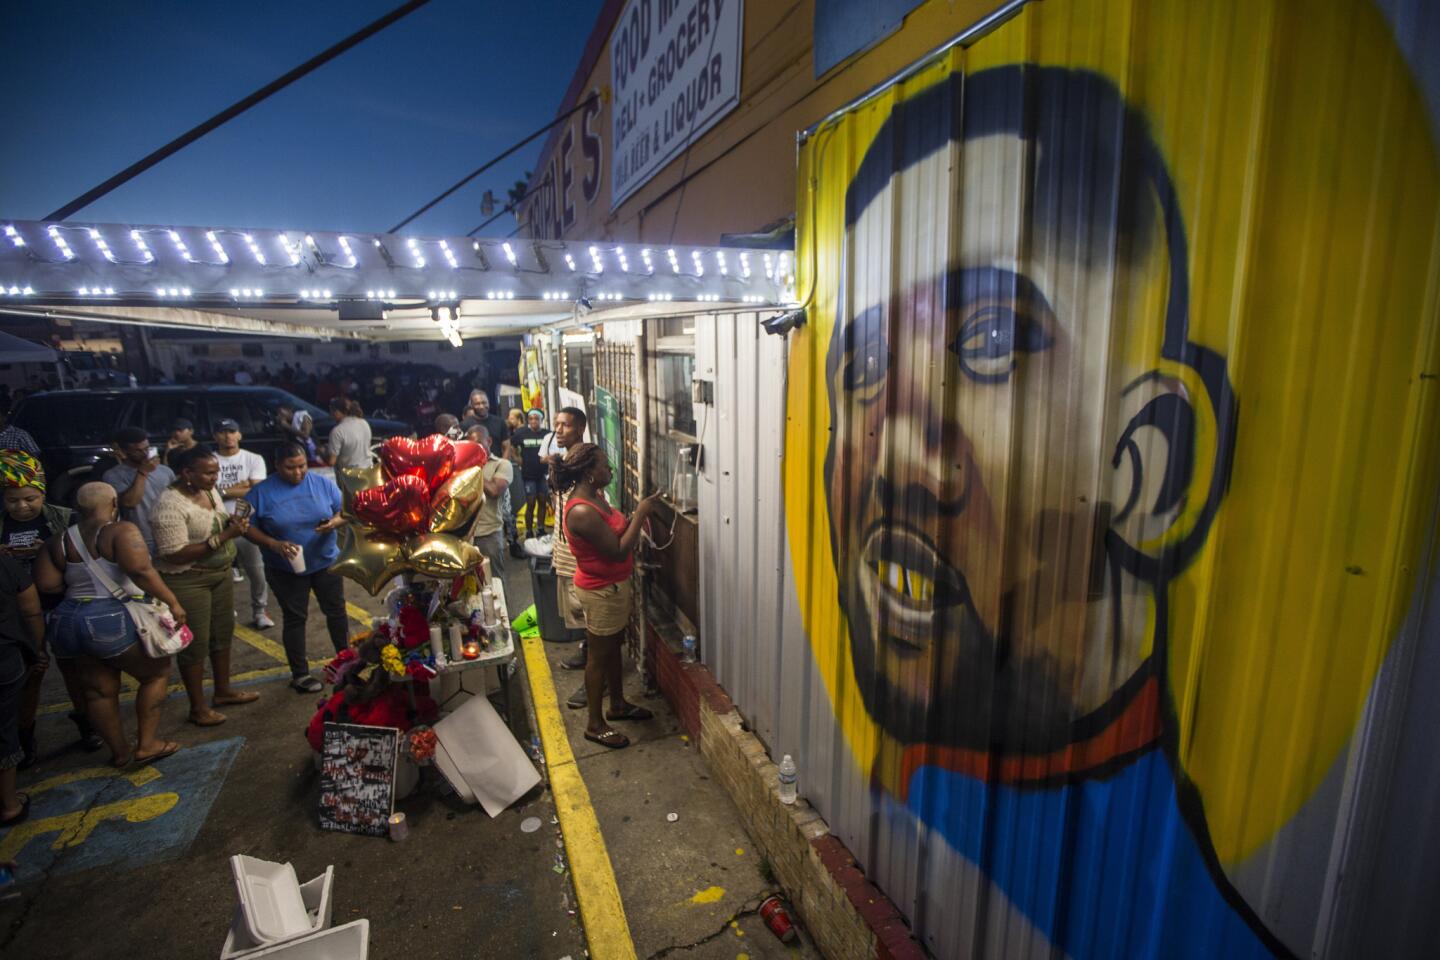 Protesters gather in front of a mural painted on the wall of the convenience store where Alton Sterling was shot and killed, July 6, 2016 in Baton Rouge, Louisiana.